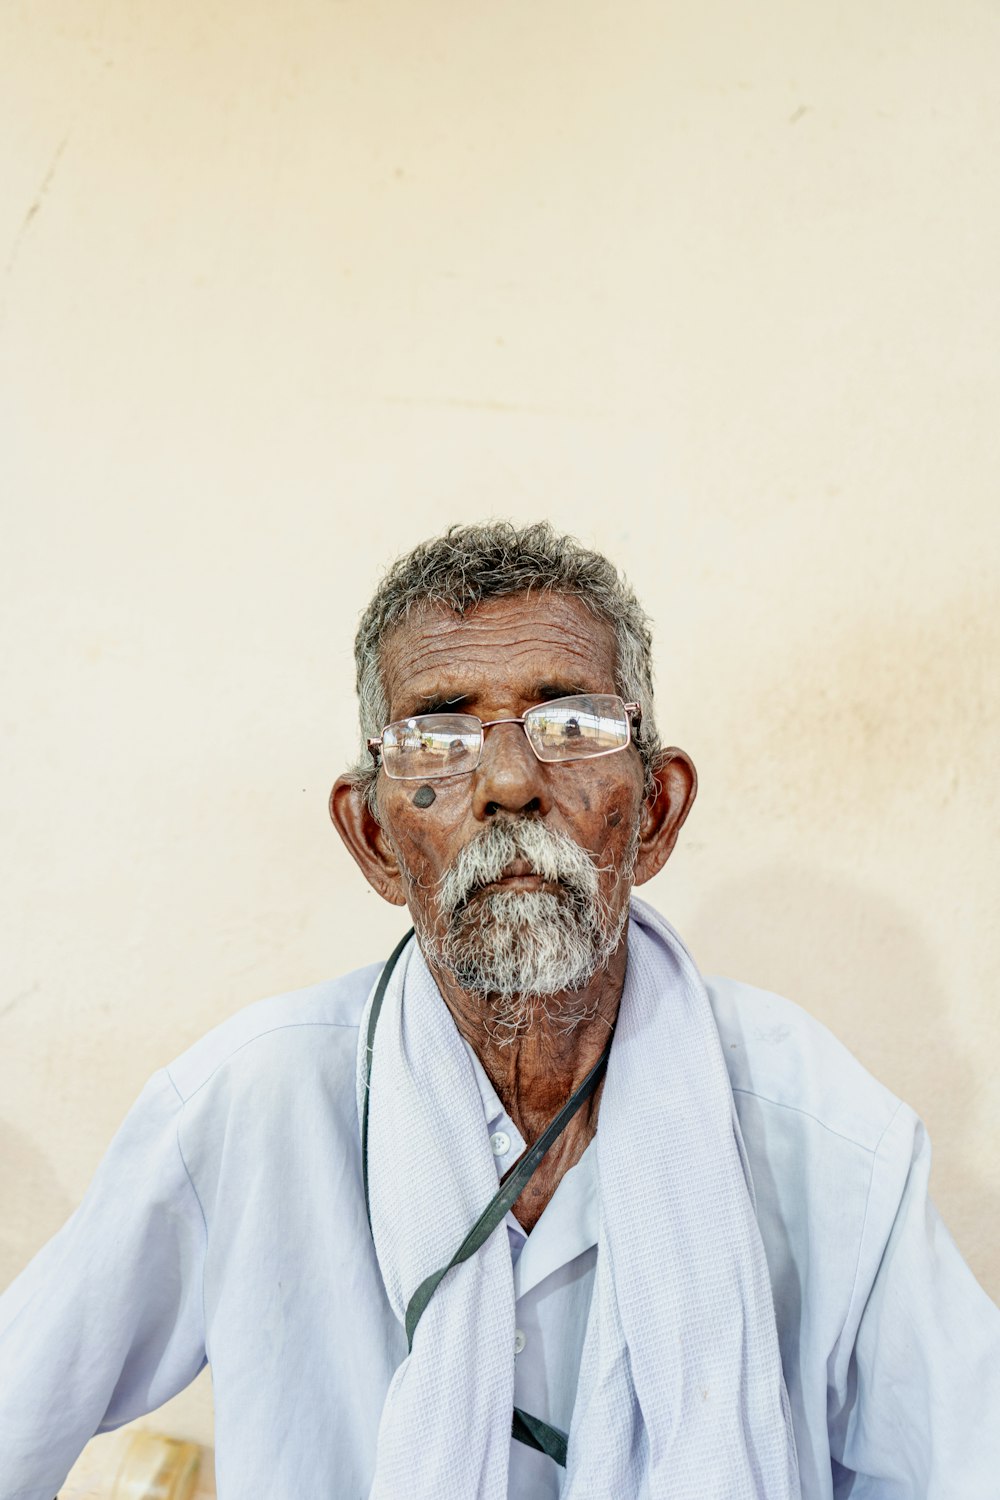 an old man with glasses and a tie